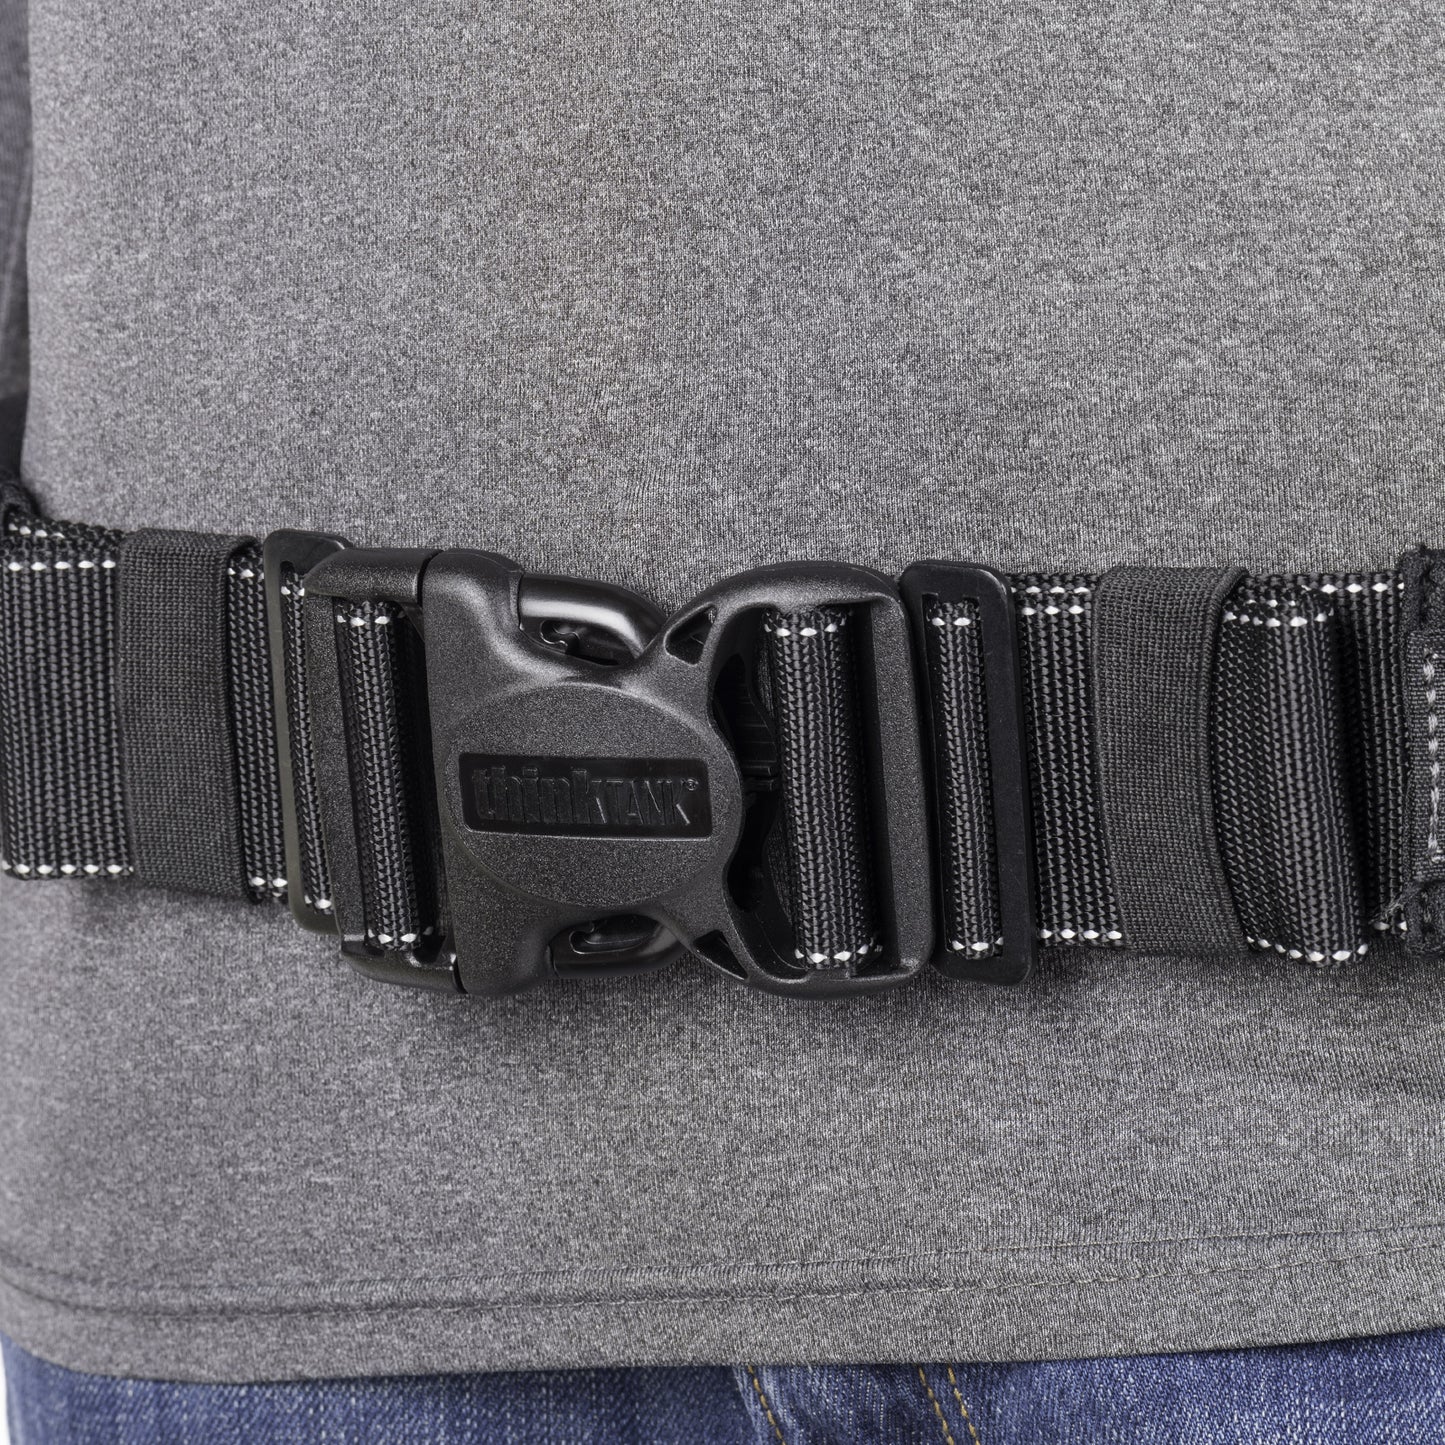 
                  
                    Adjustable buckle stops prevent belt from loosening yet are easy to resize
                  
                